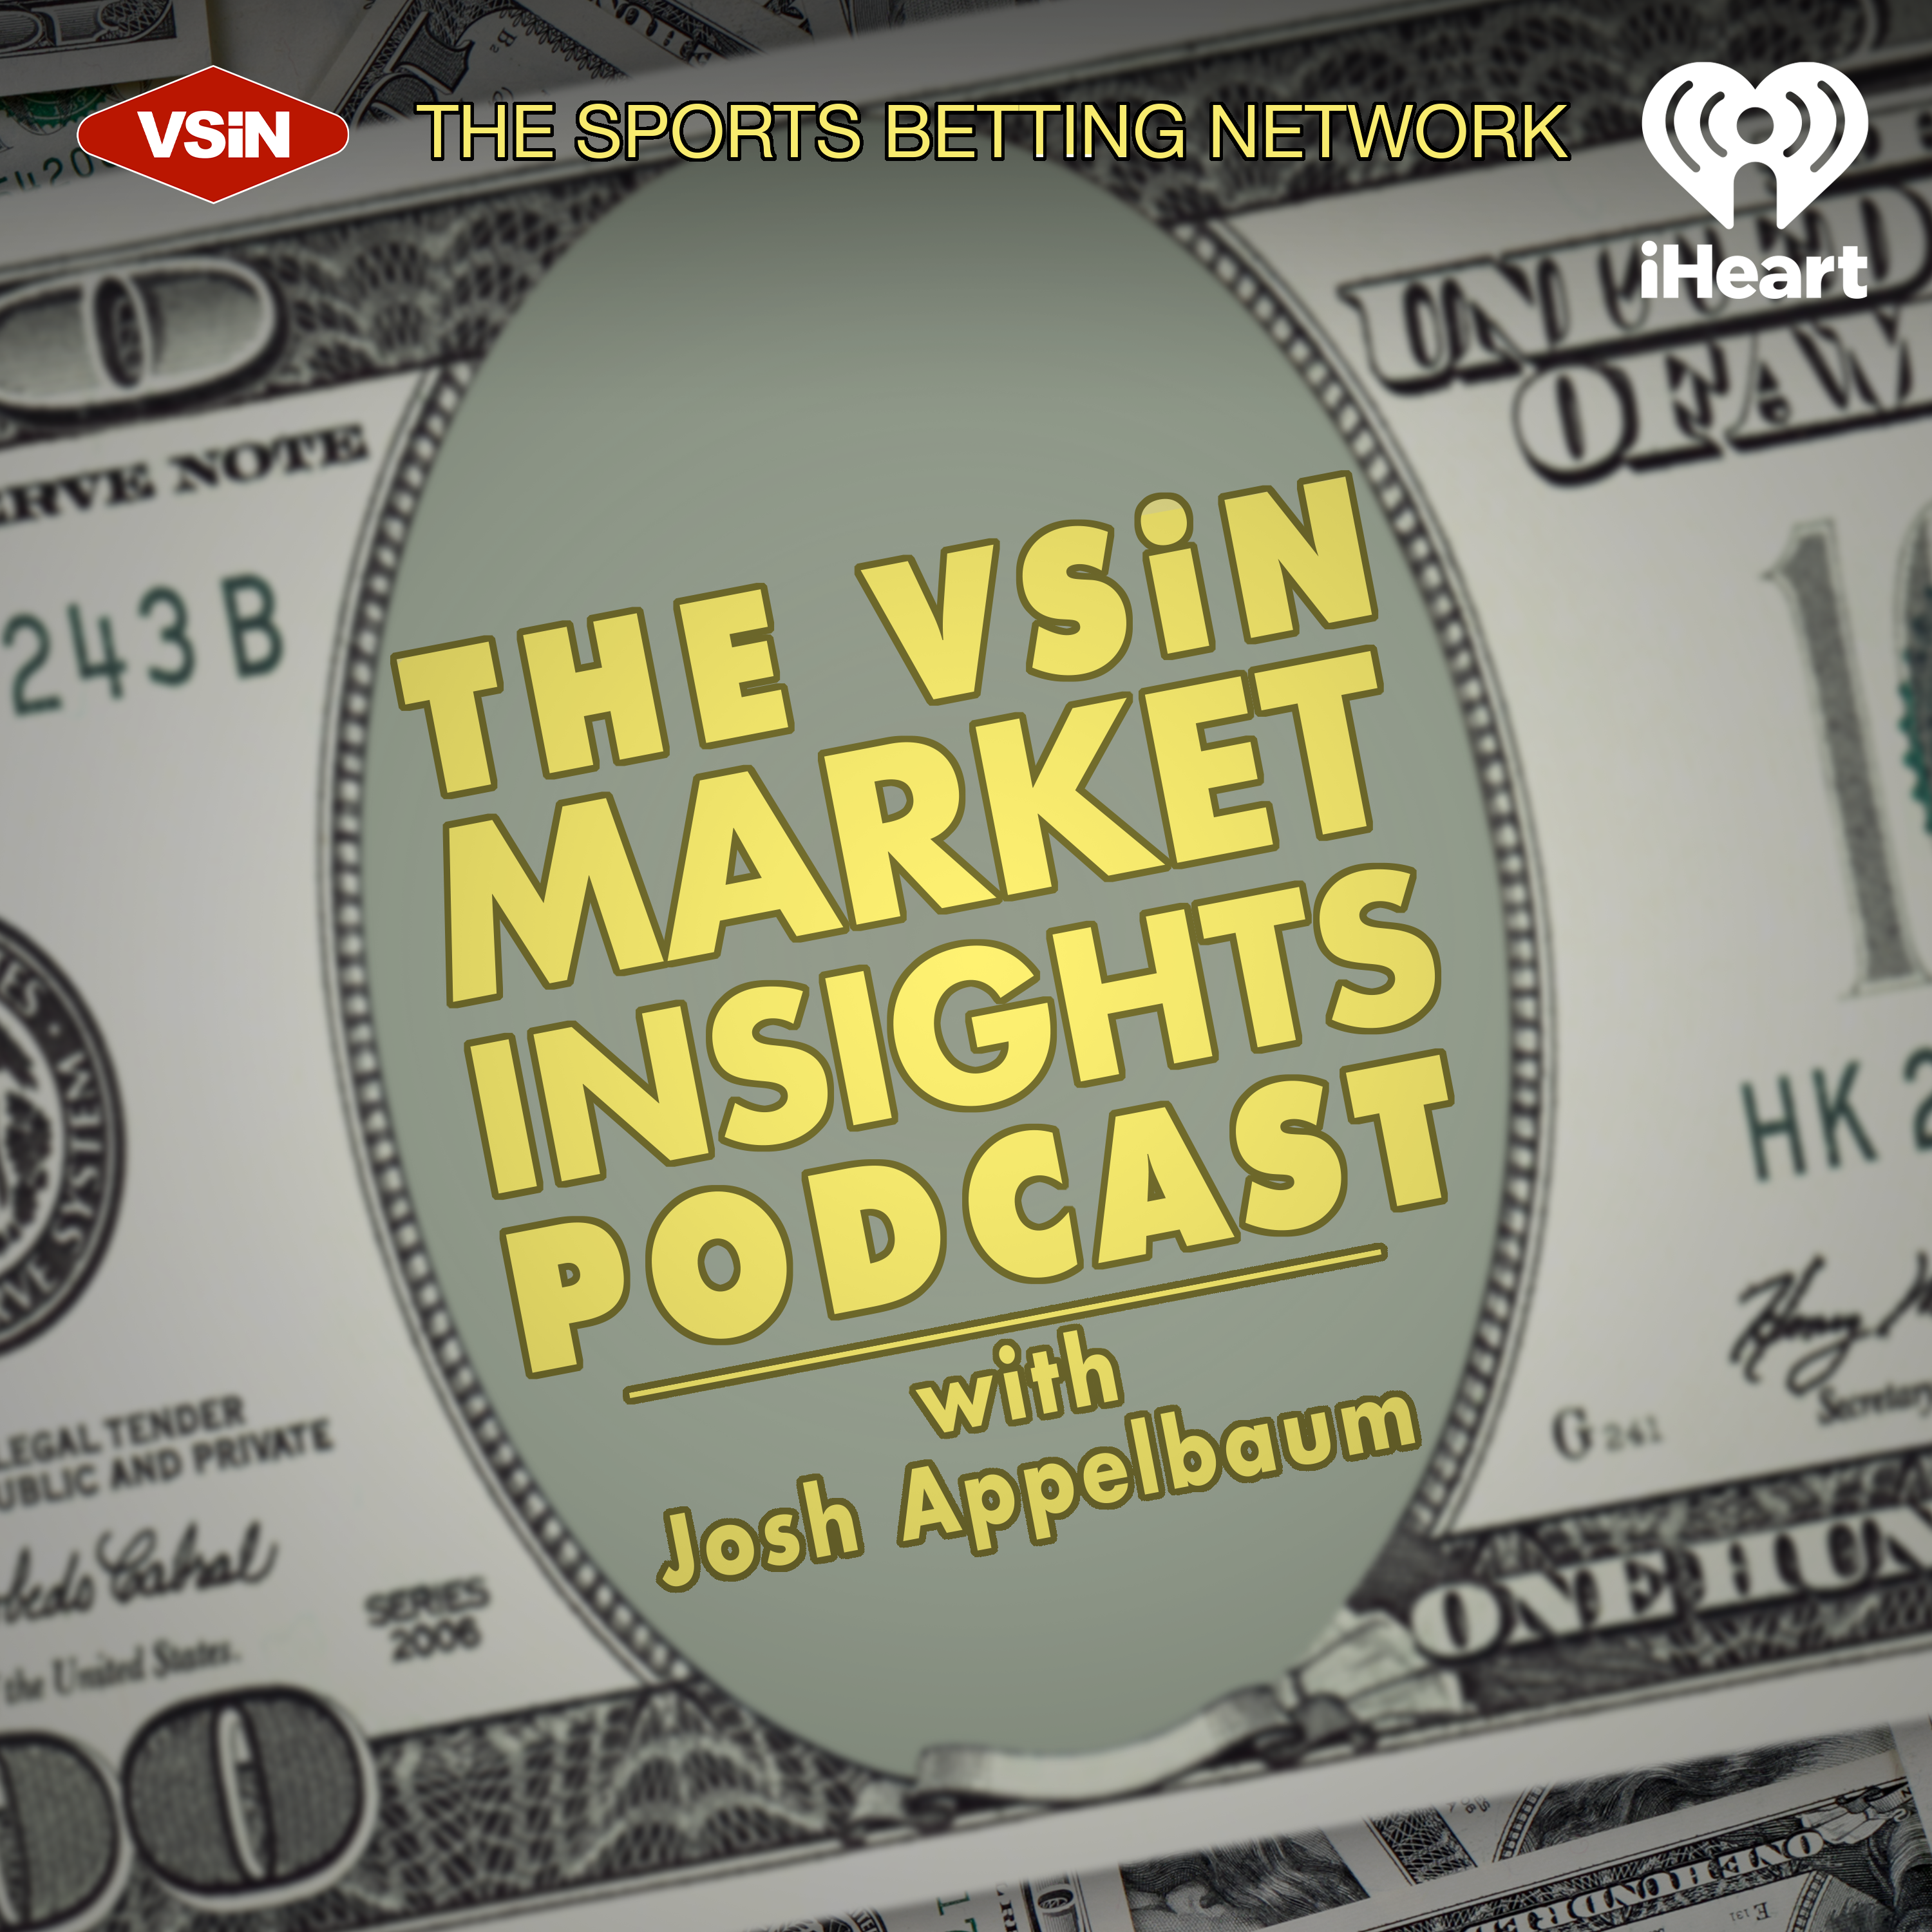 The VSiN Market Insights Podcast with Josh Appelbaum | February 22, 2022